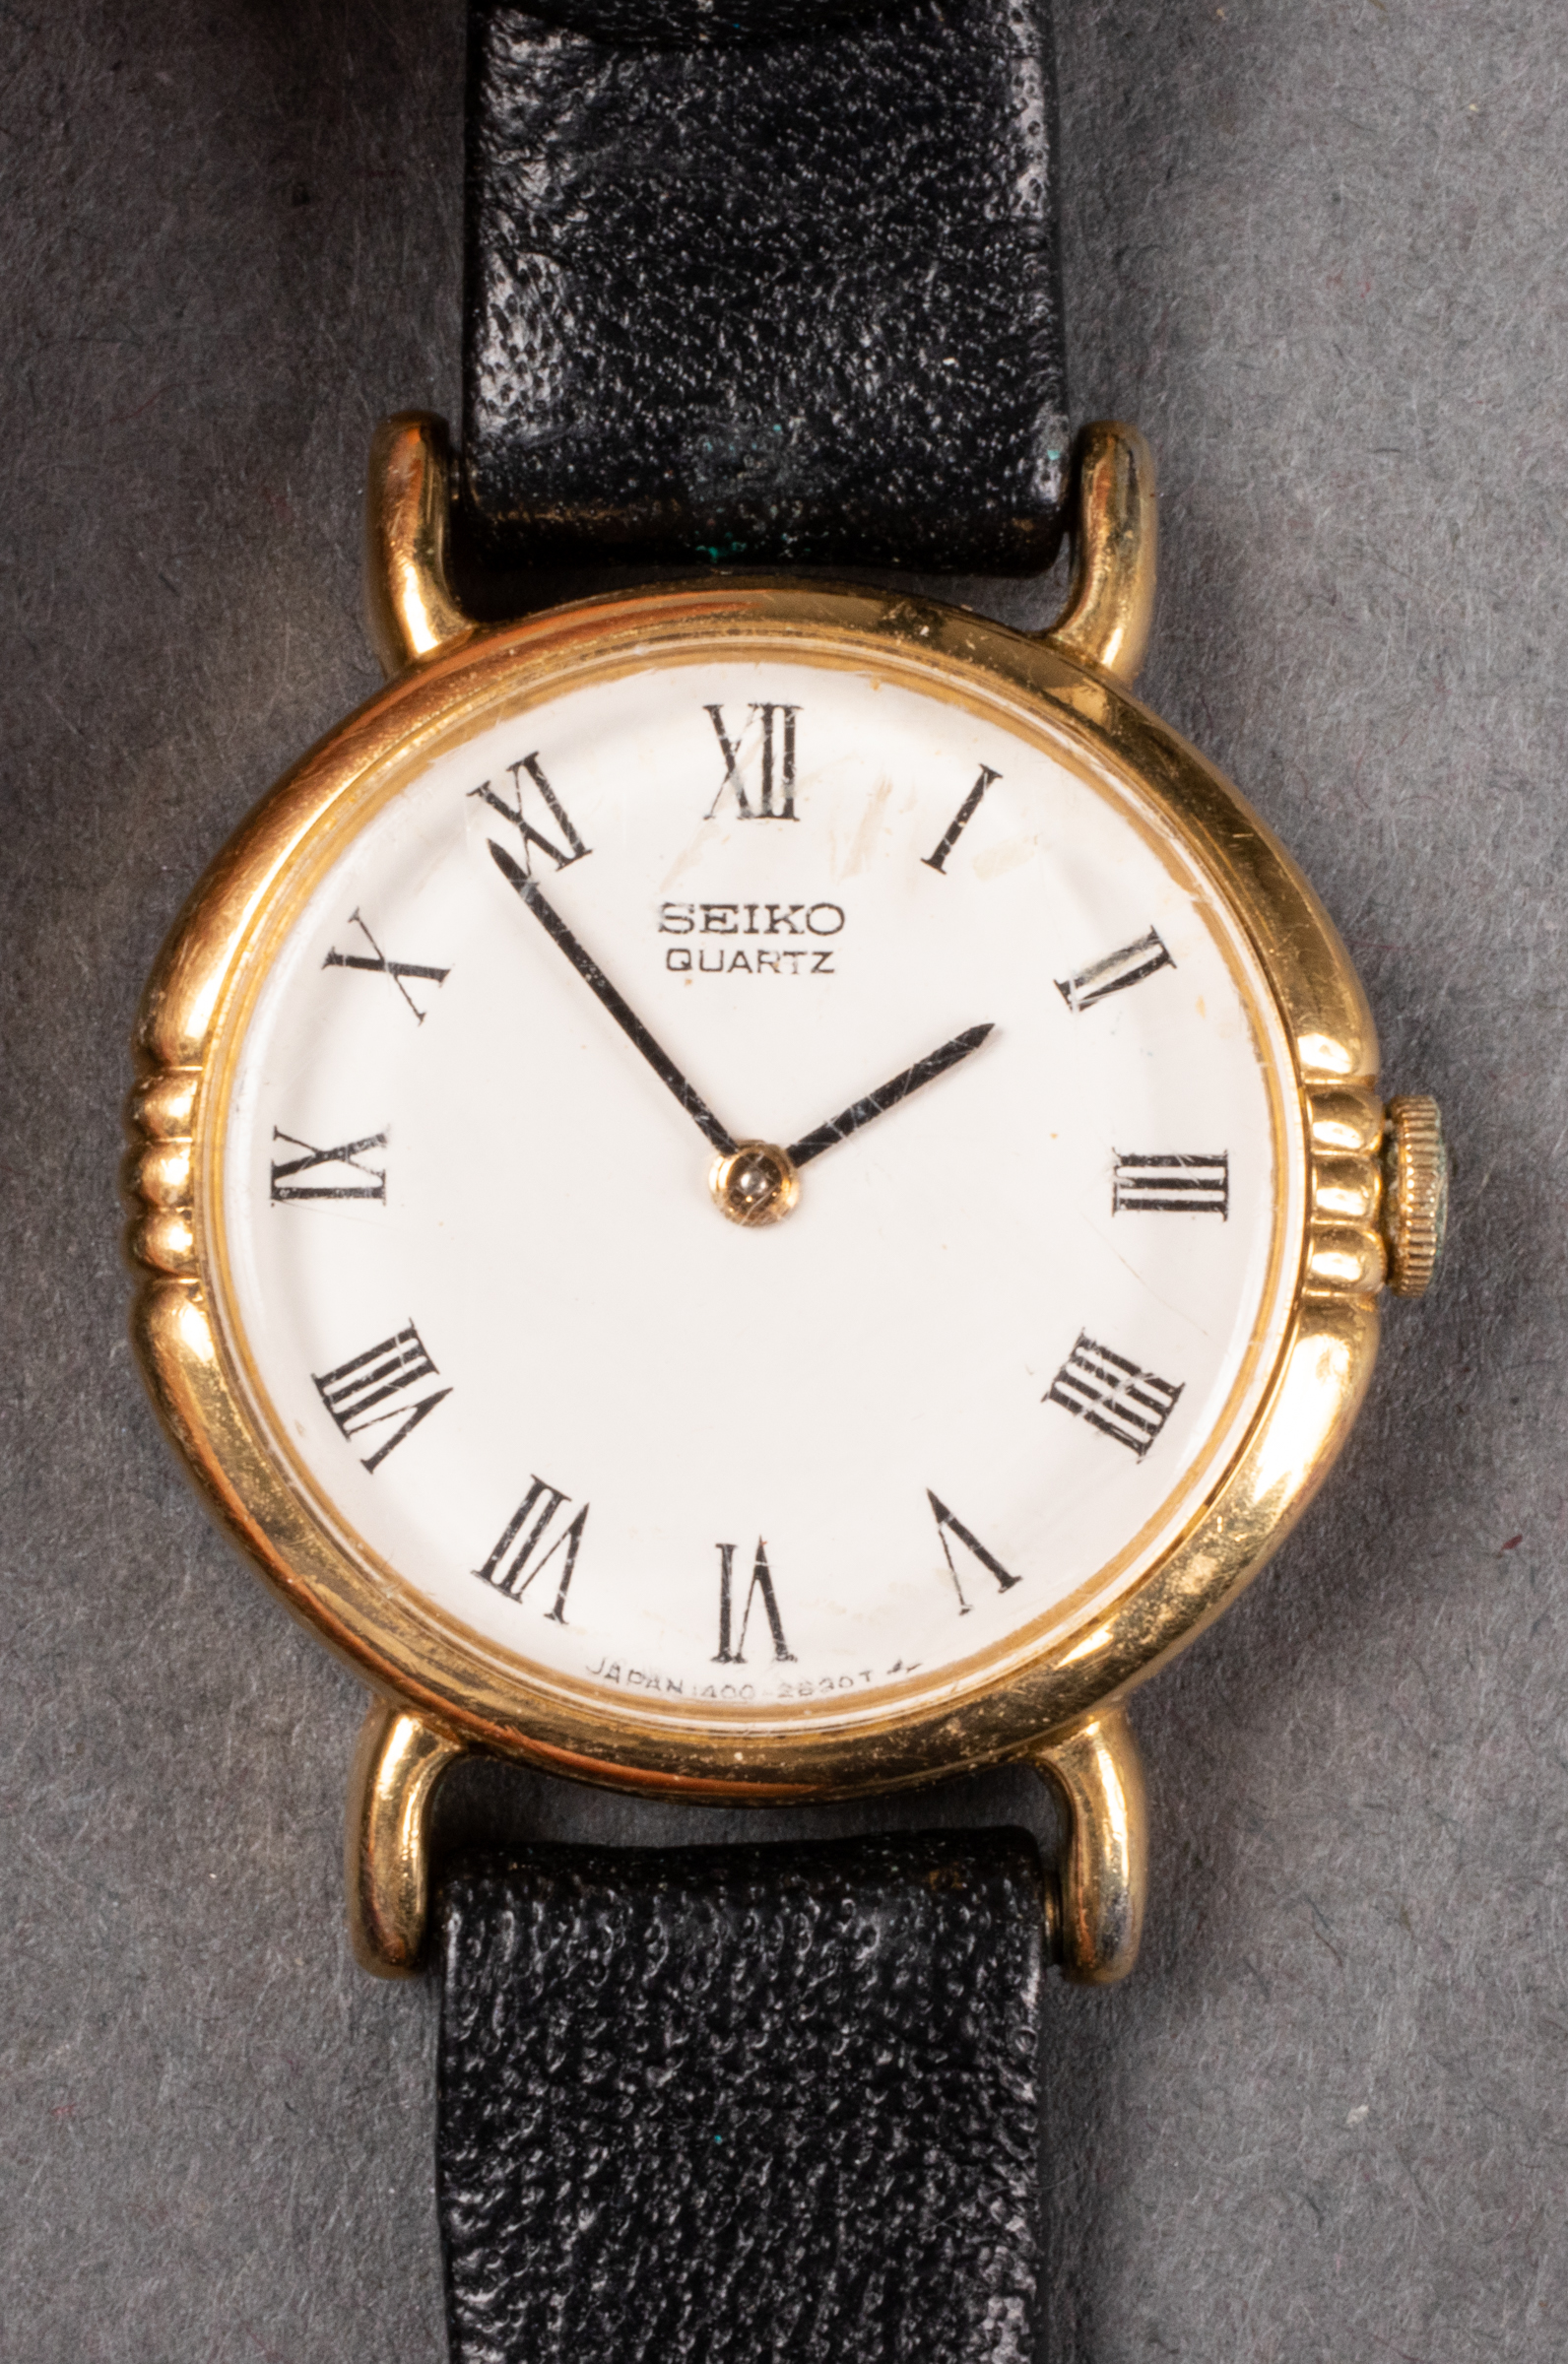 VINTAGE GOLD PLATED SEIKO WATCH 3c3b1a